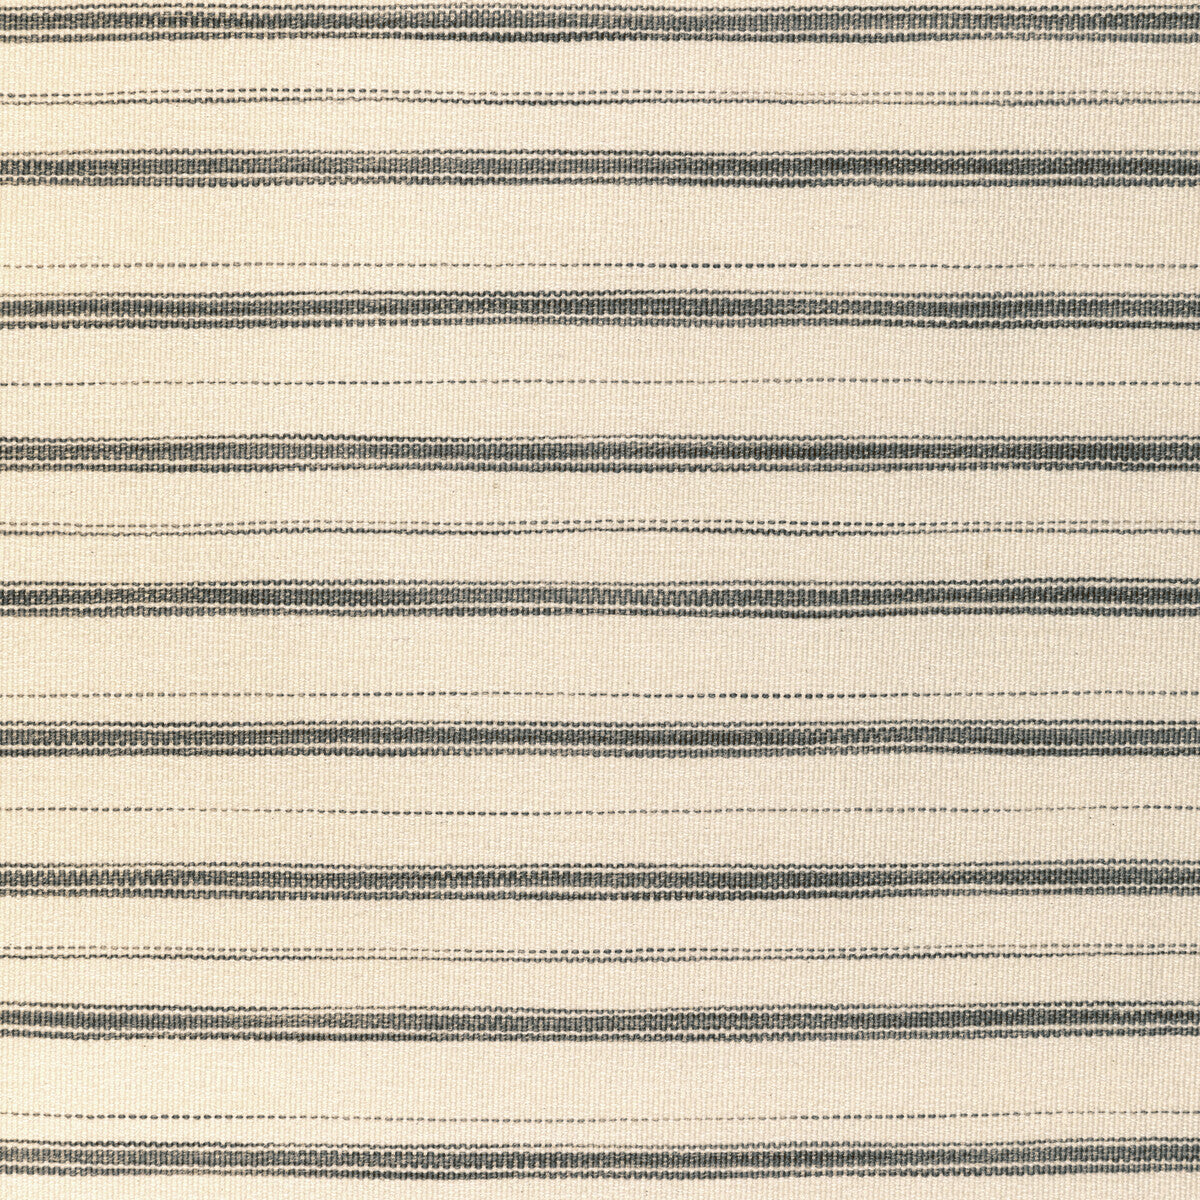 Meeker Stripe fabric in grey color - pattern 2020209.11.0 - by Lee Jofa in the Breckenridge collection